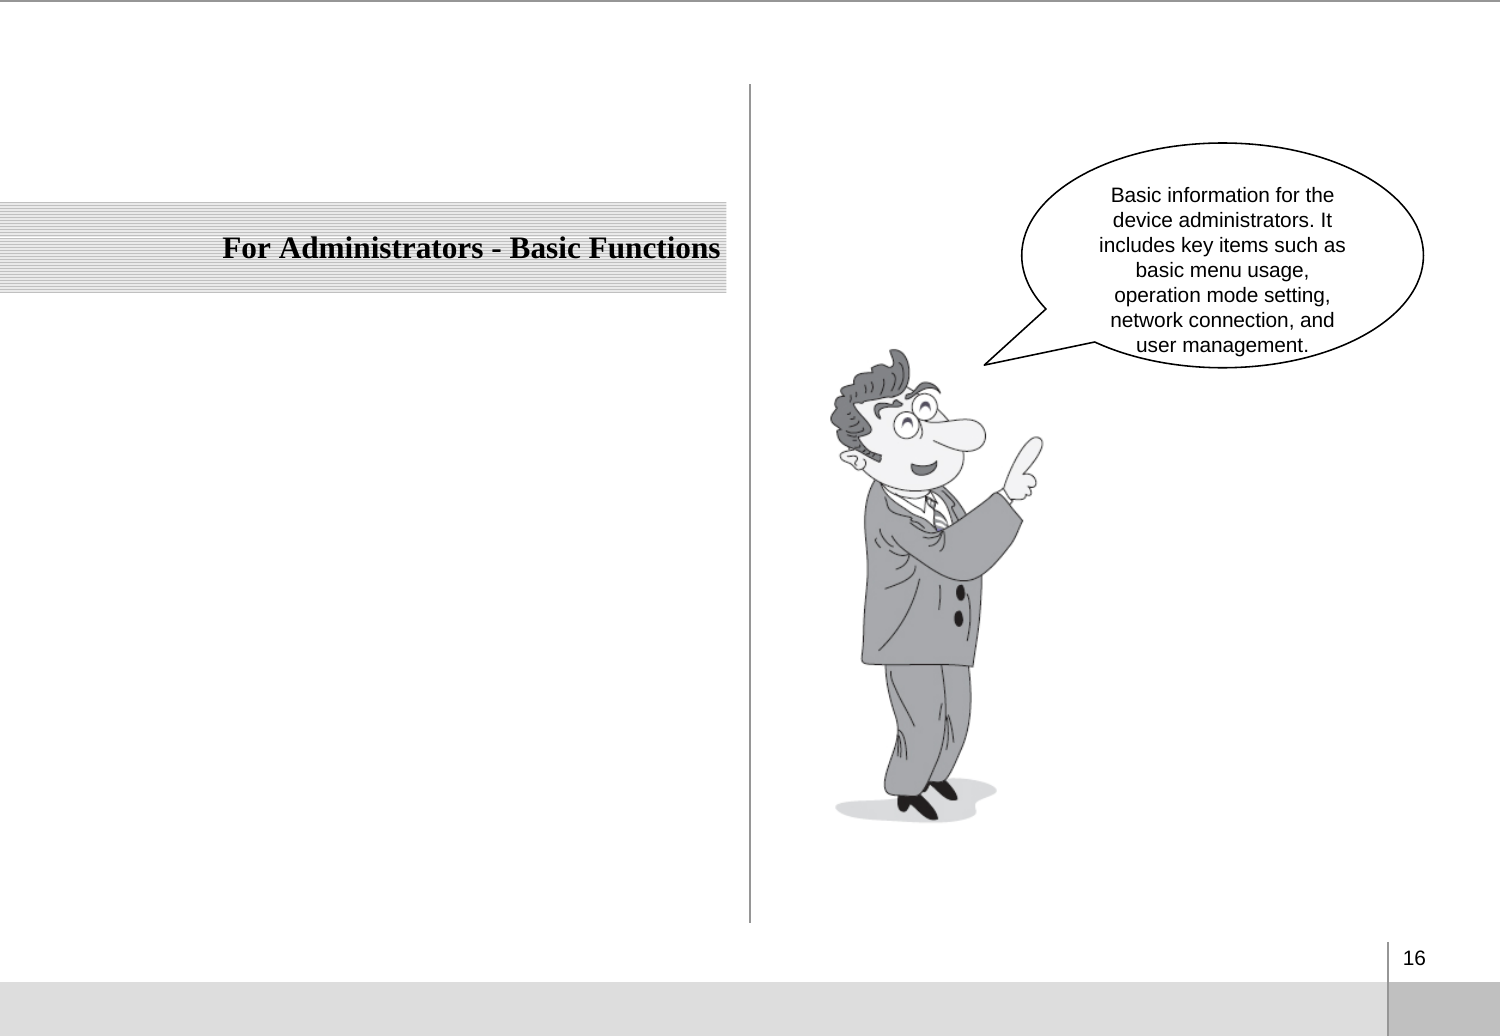 16For Administrators - Basic FunctionsBasic information for the device administrators. It includes key items such as basic menu usage, operation mode setting, network connection, and user management. 